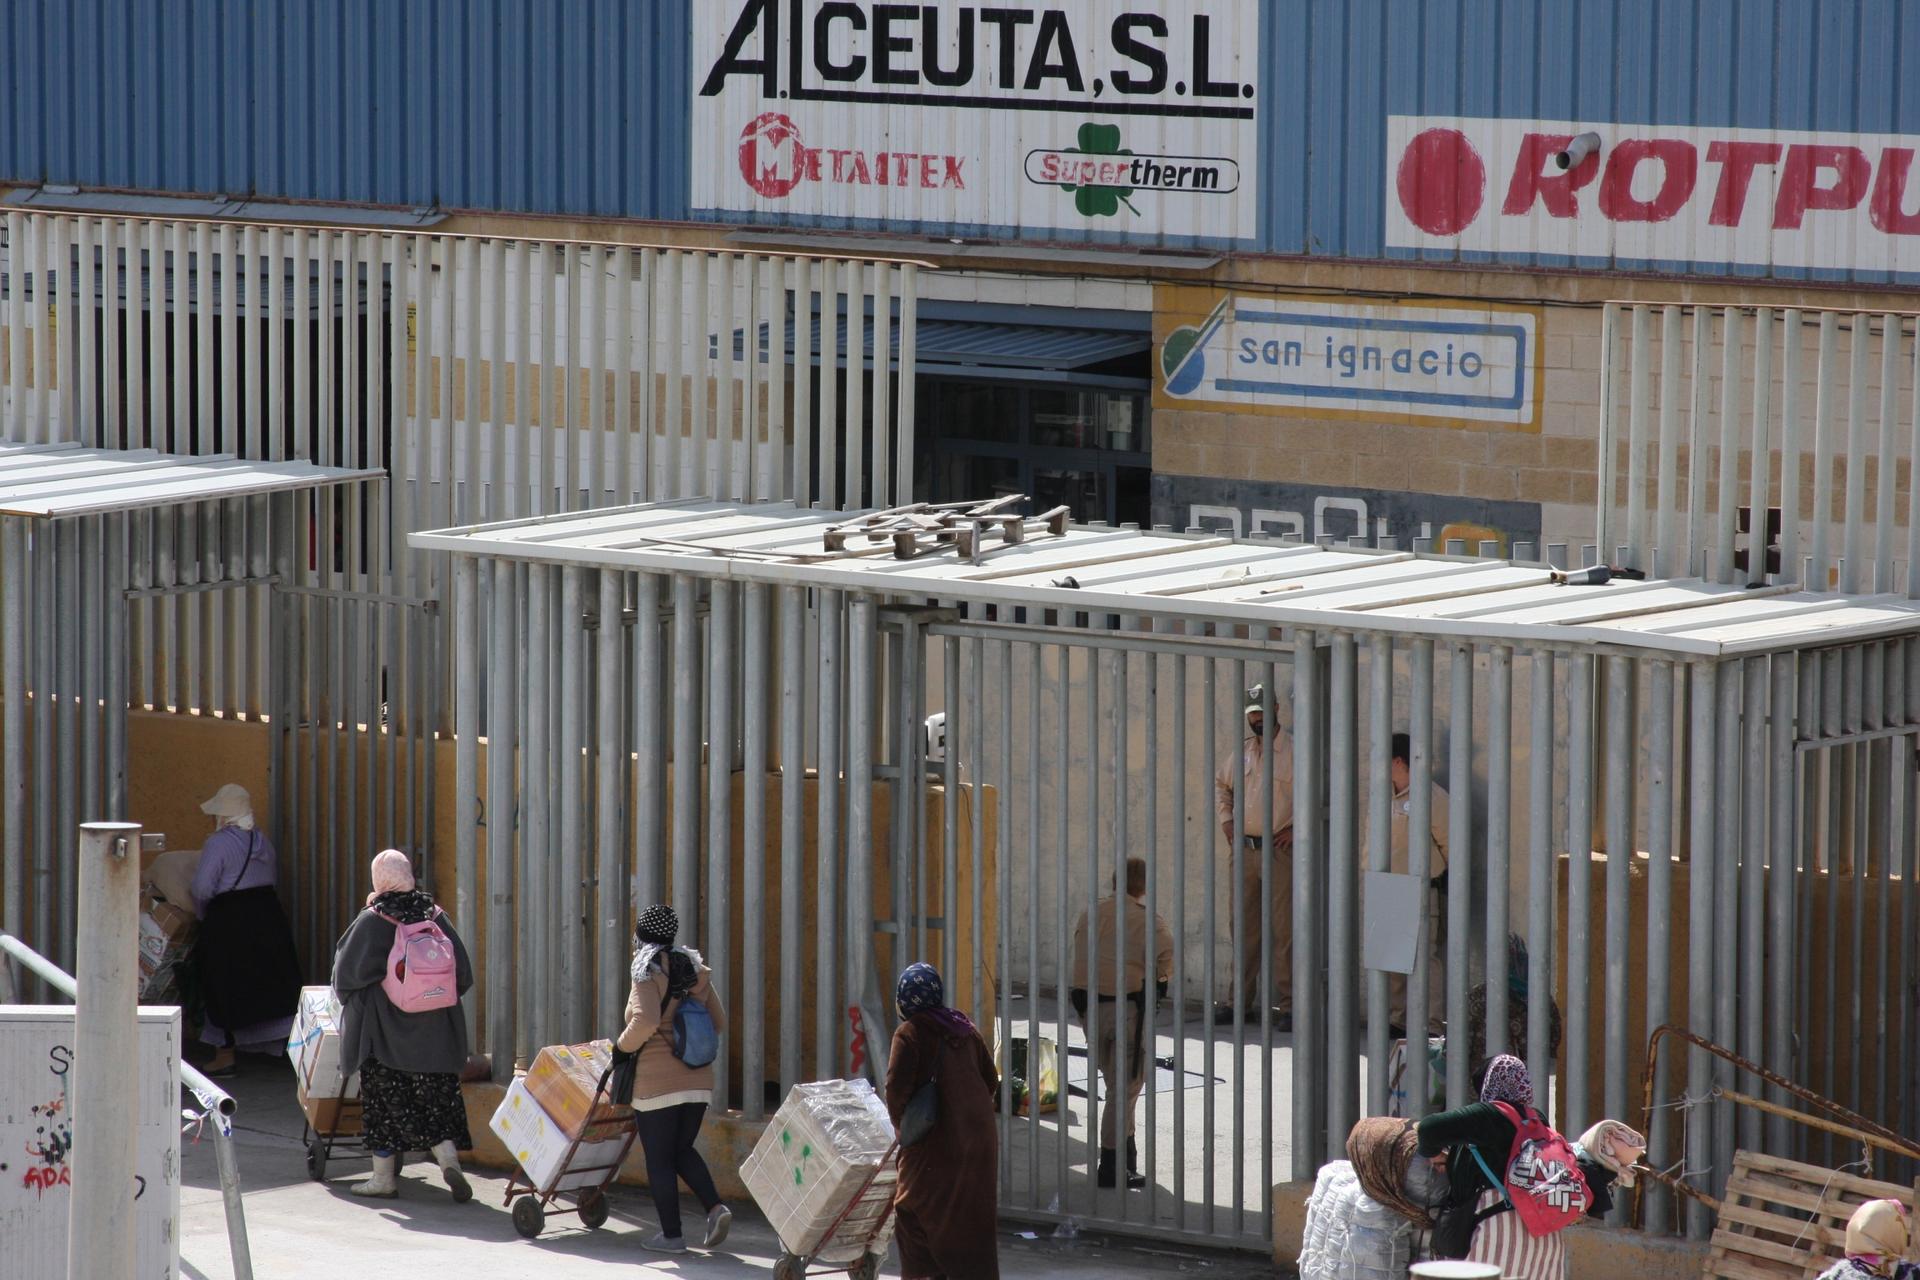 women line up to enter metal gates into spain